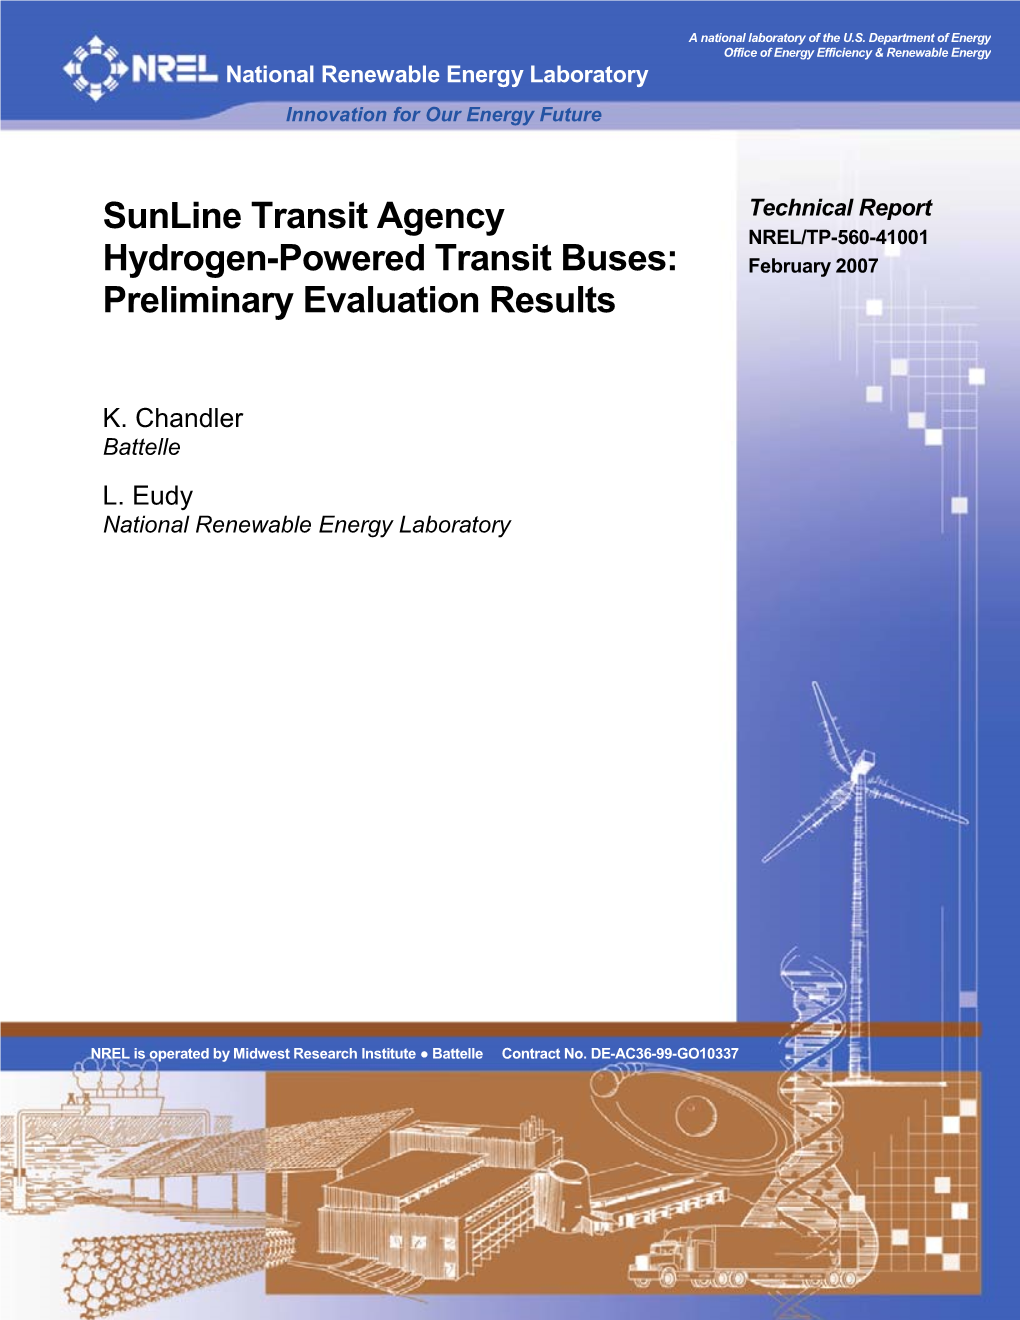 Sunline Transit Agency, Hydrogen-Powered Buses: DE-AC36-99-GO10337 Preliminary Evaluation Results 5B